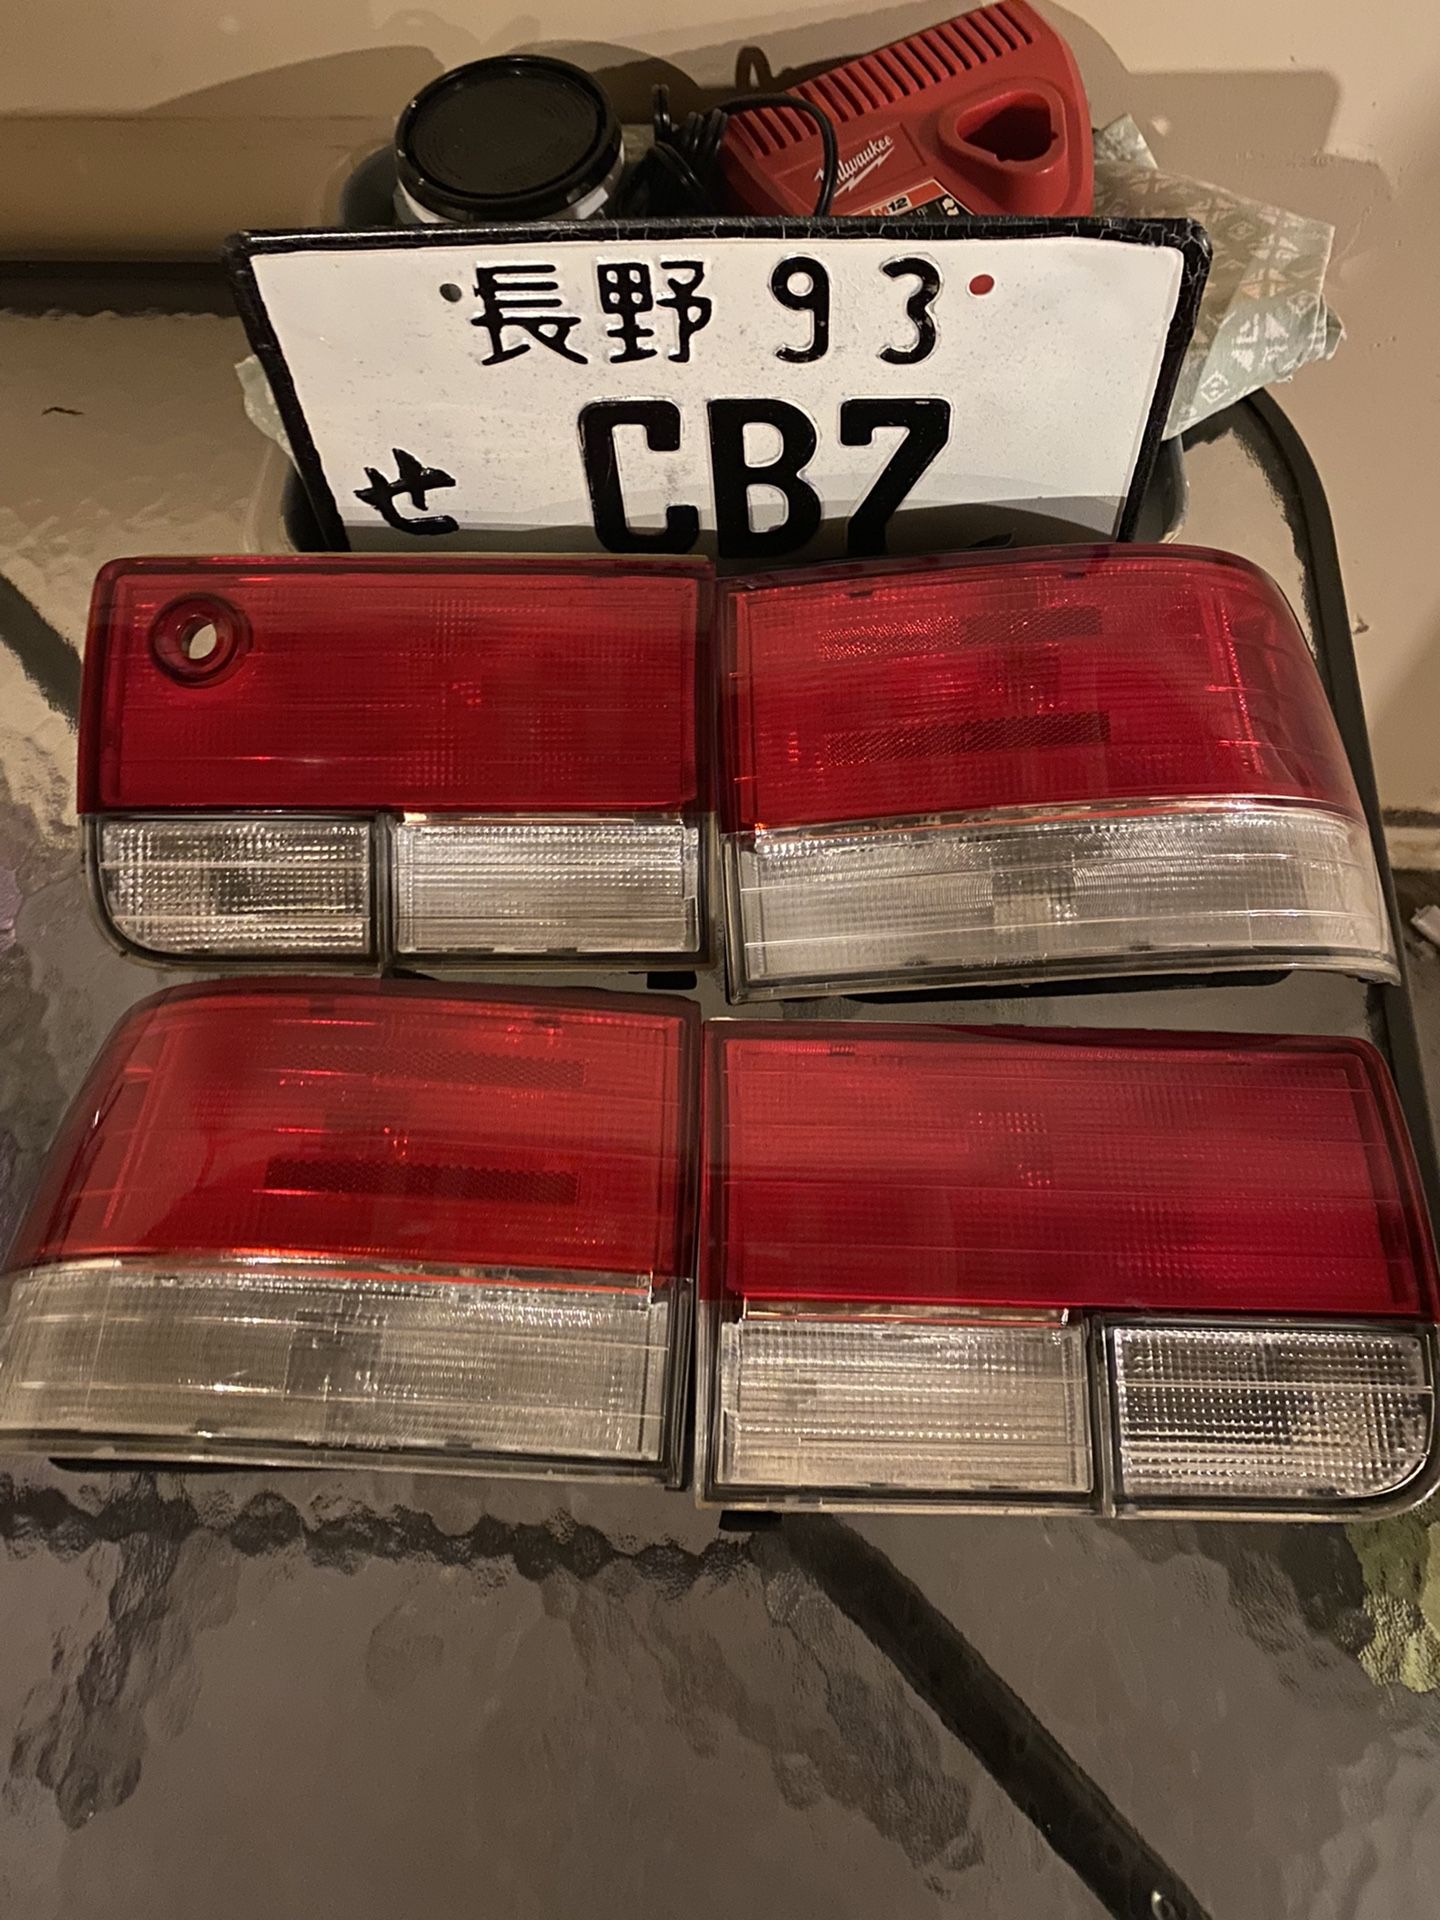 92 93 Honda Accord Cb7 Taillights Discontinued Out Of Stock 